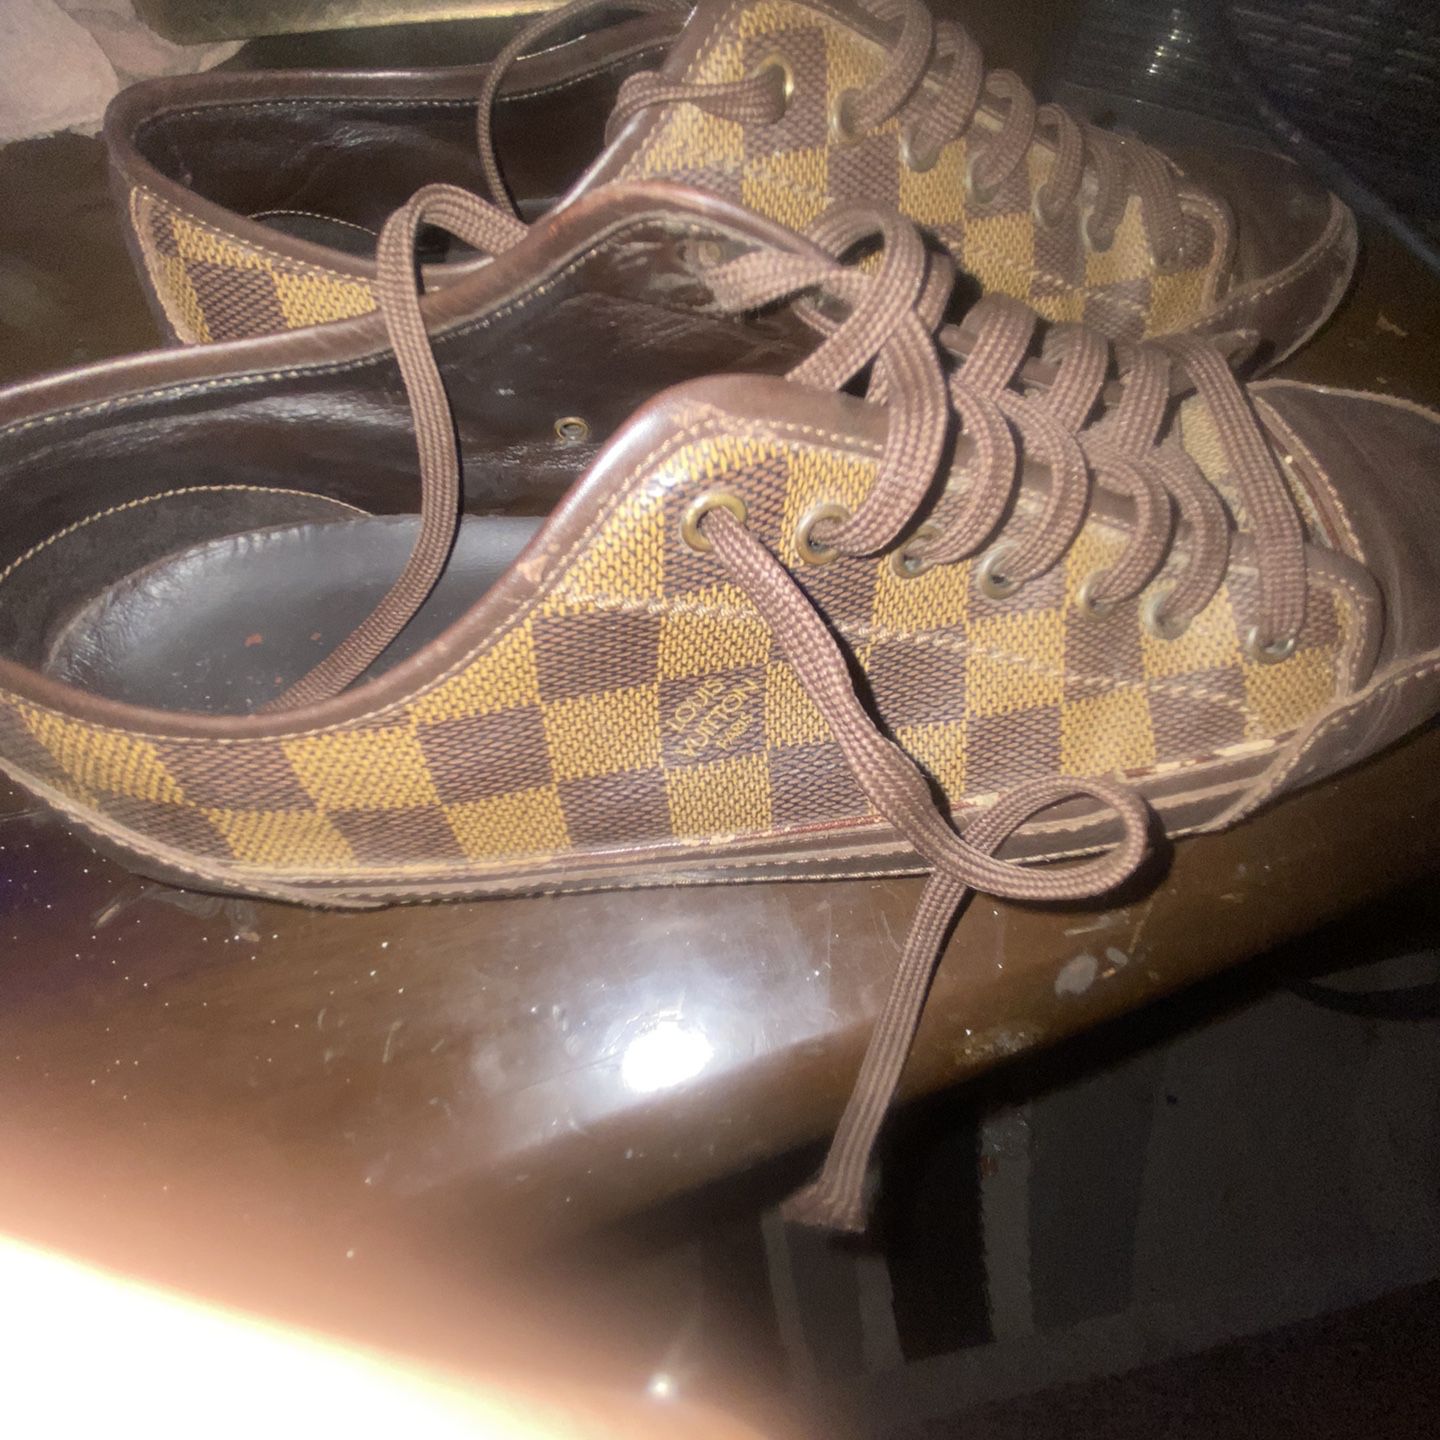 Louis vuitton luxembourg sneaker, size 10 price :175 for Sale in